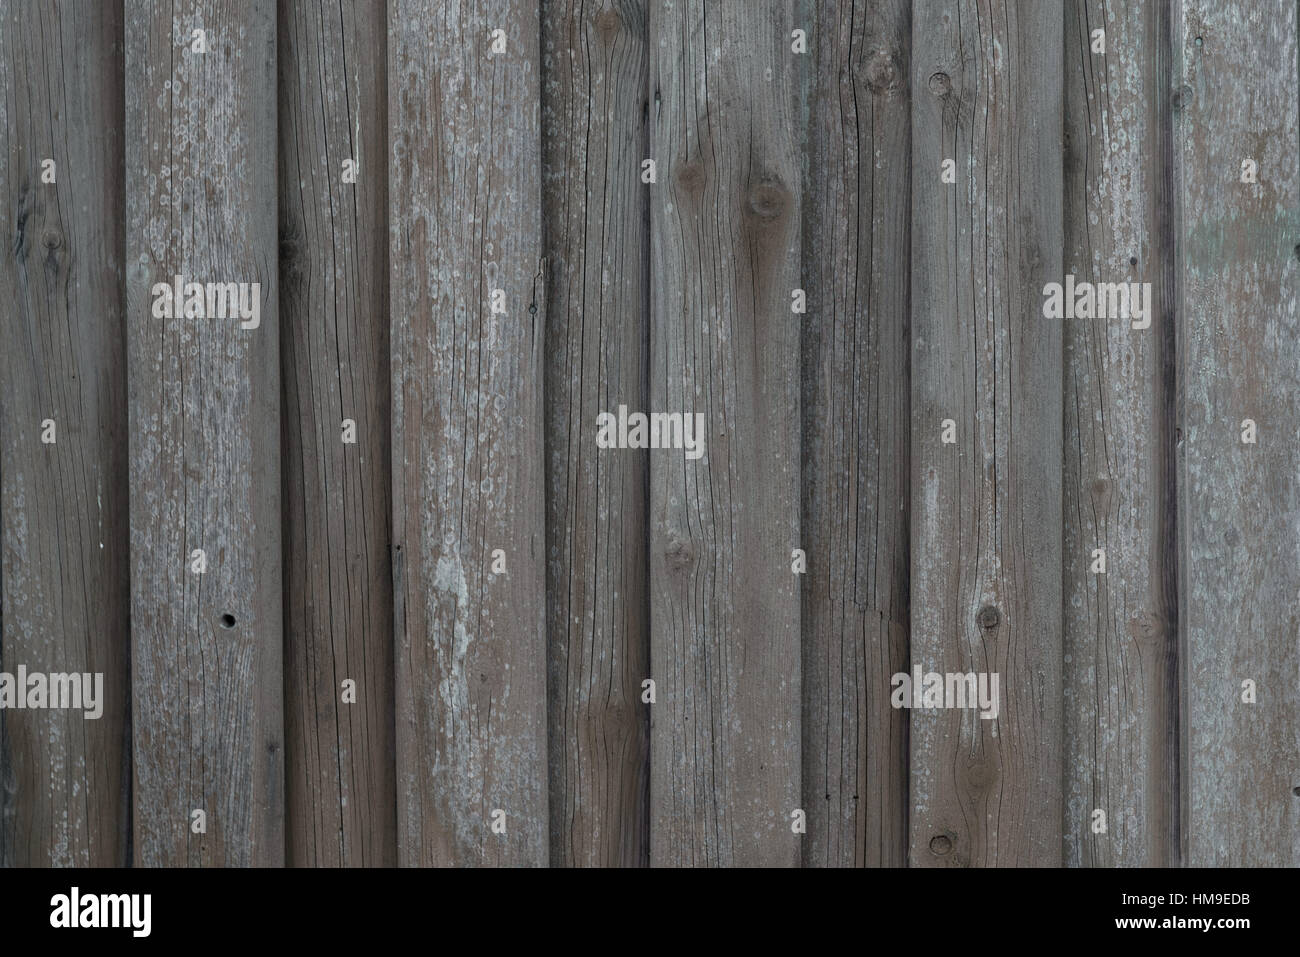 background texture vertical timber wood planks Stock Photo